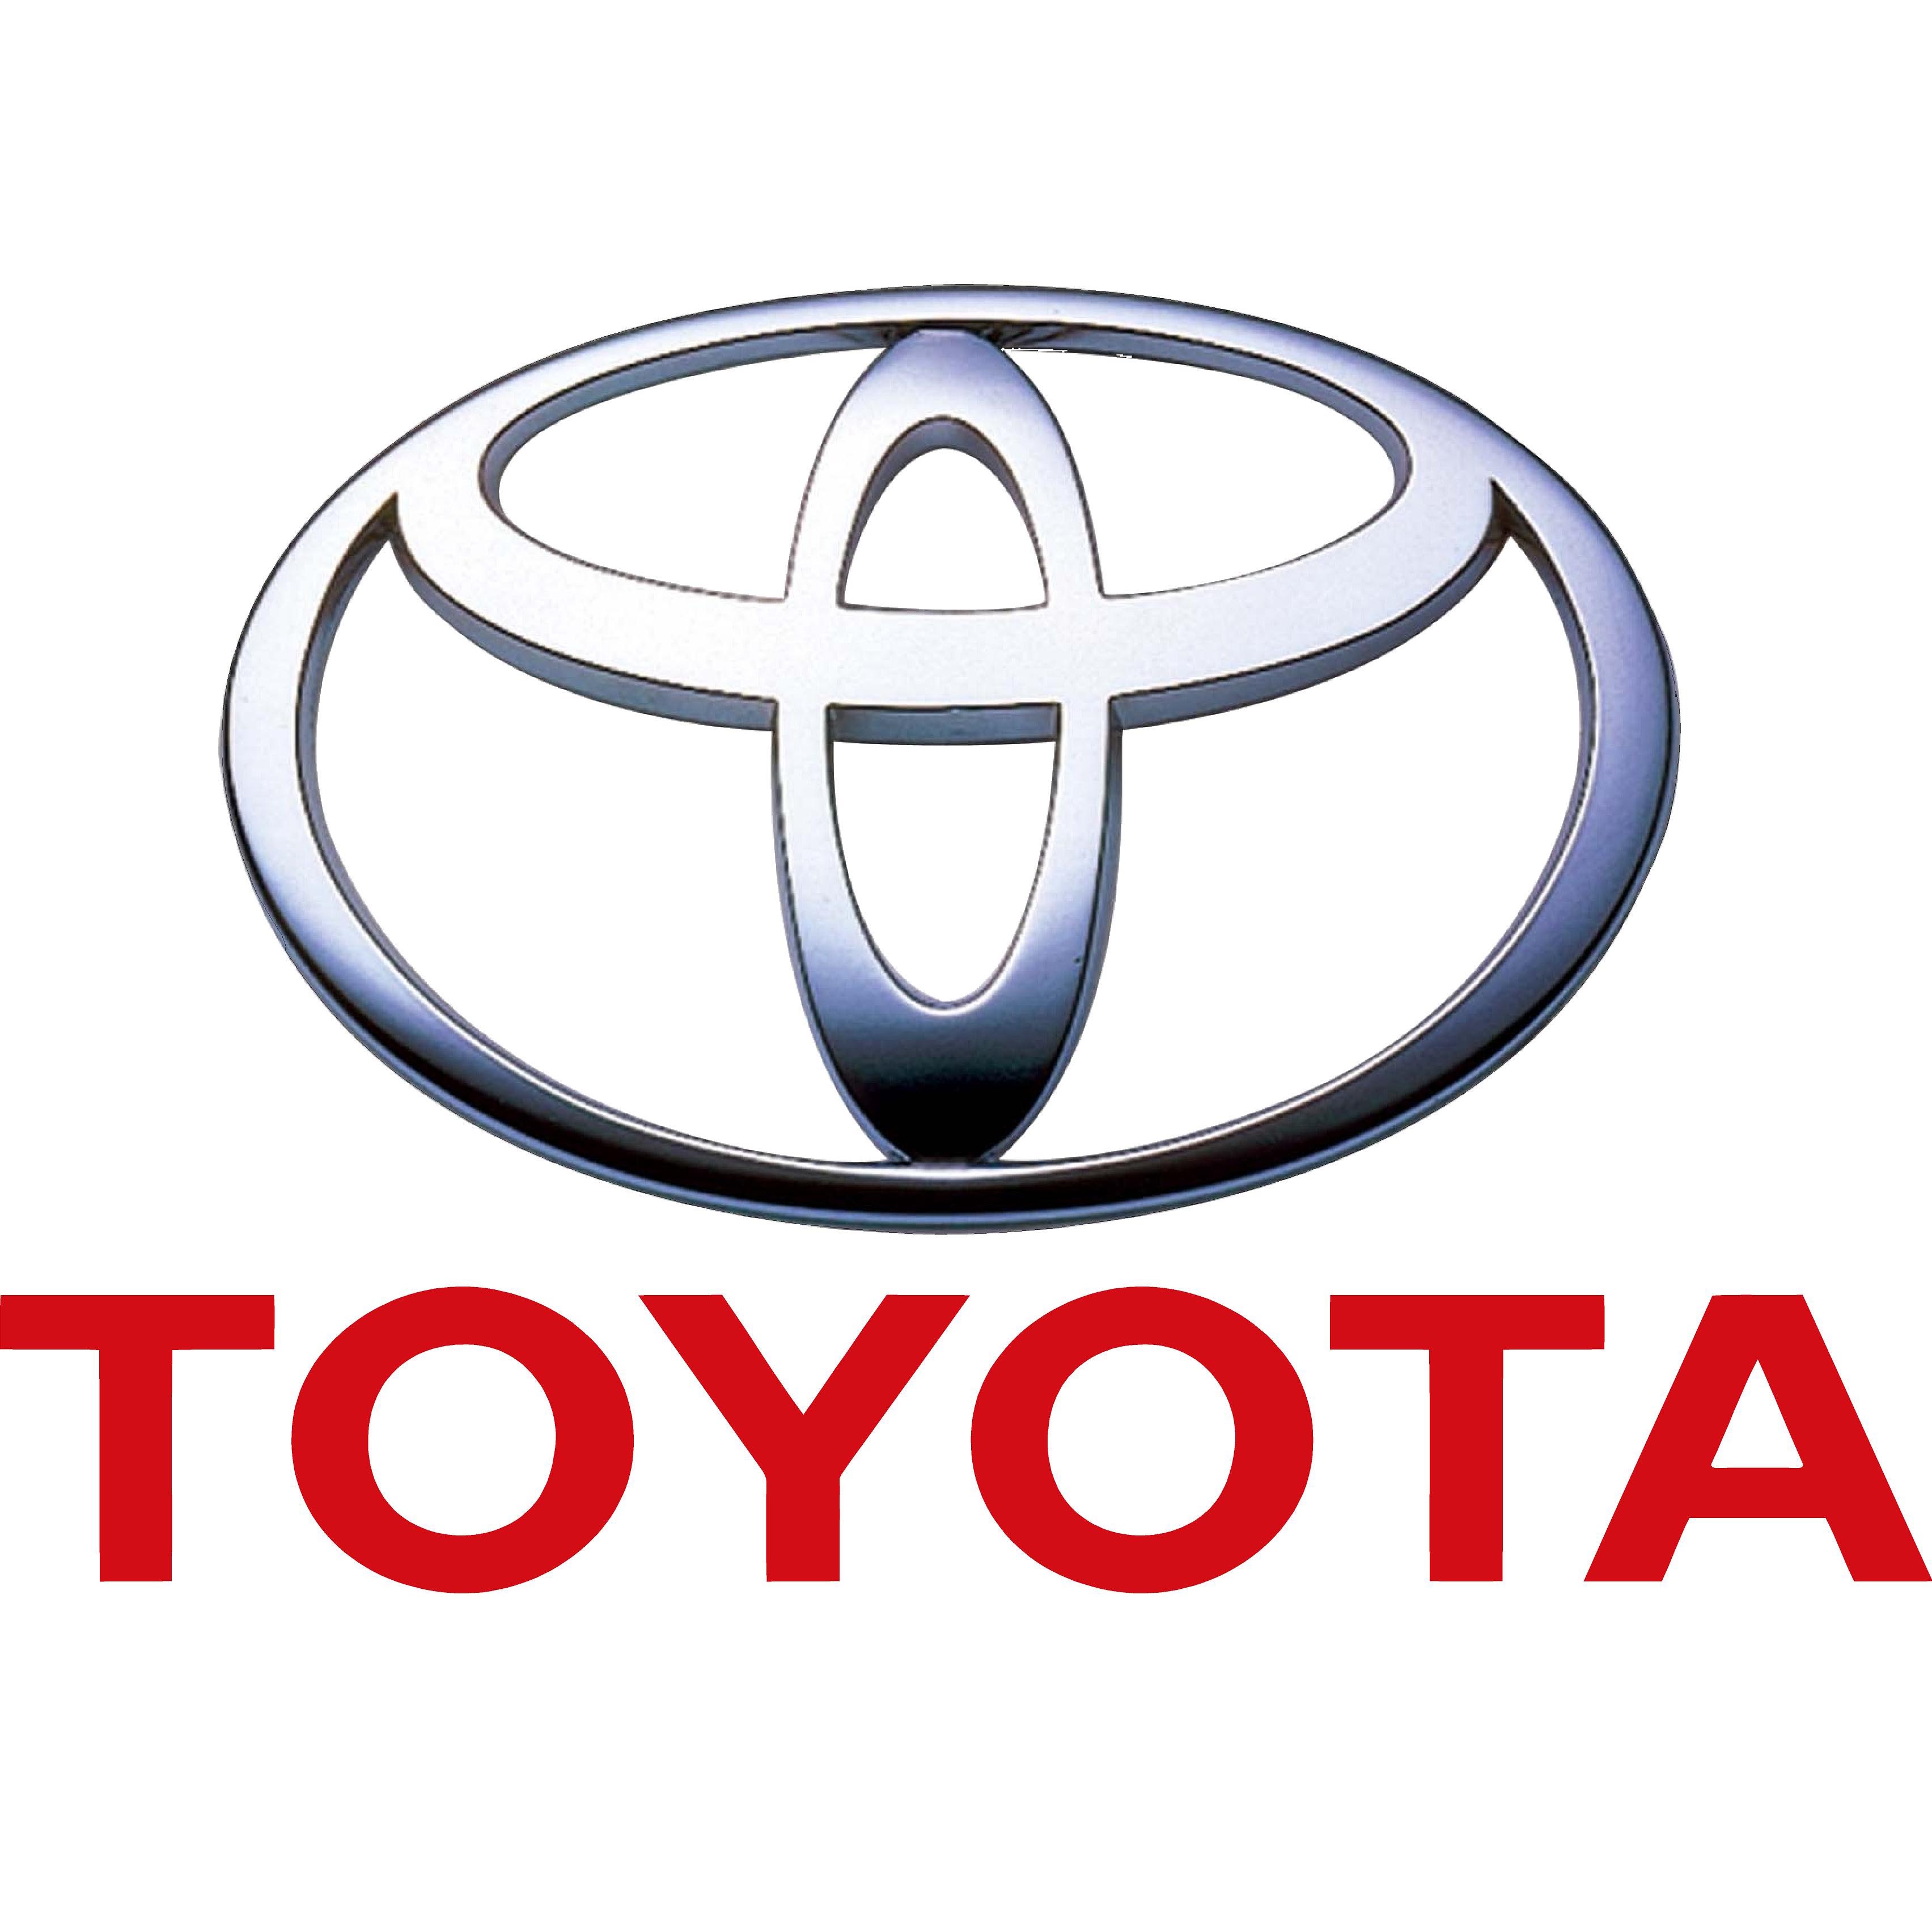 Toyota Logo, Toyota Car Symbol Meaning and History Car Brand